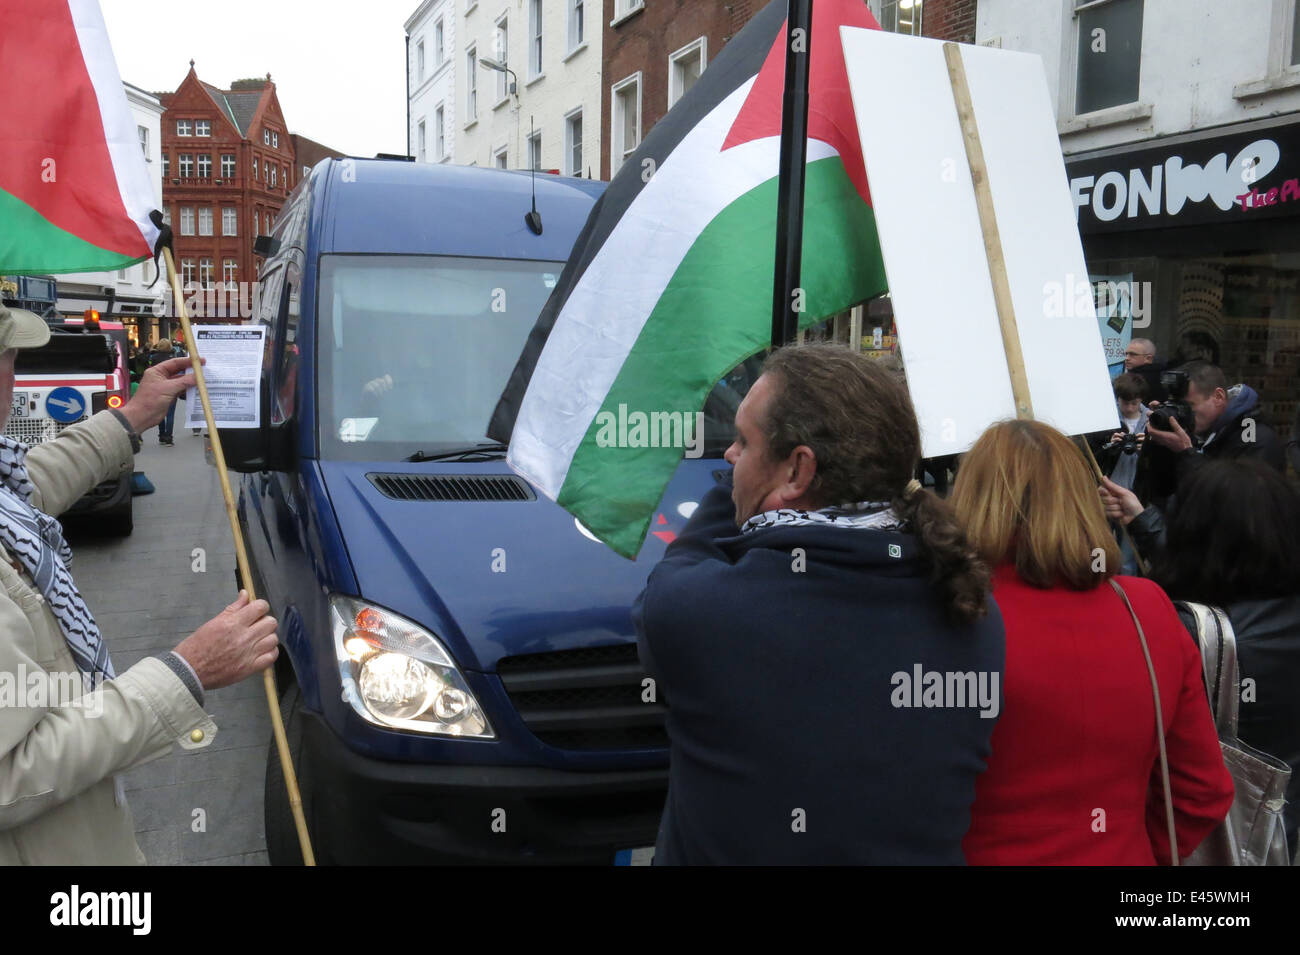 Campaigners block a G4S van at a protest against G4S private security firm by the Ireland-Palestine Solidarity Campaign (IPSC). Stock Photo